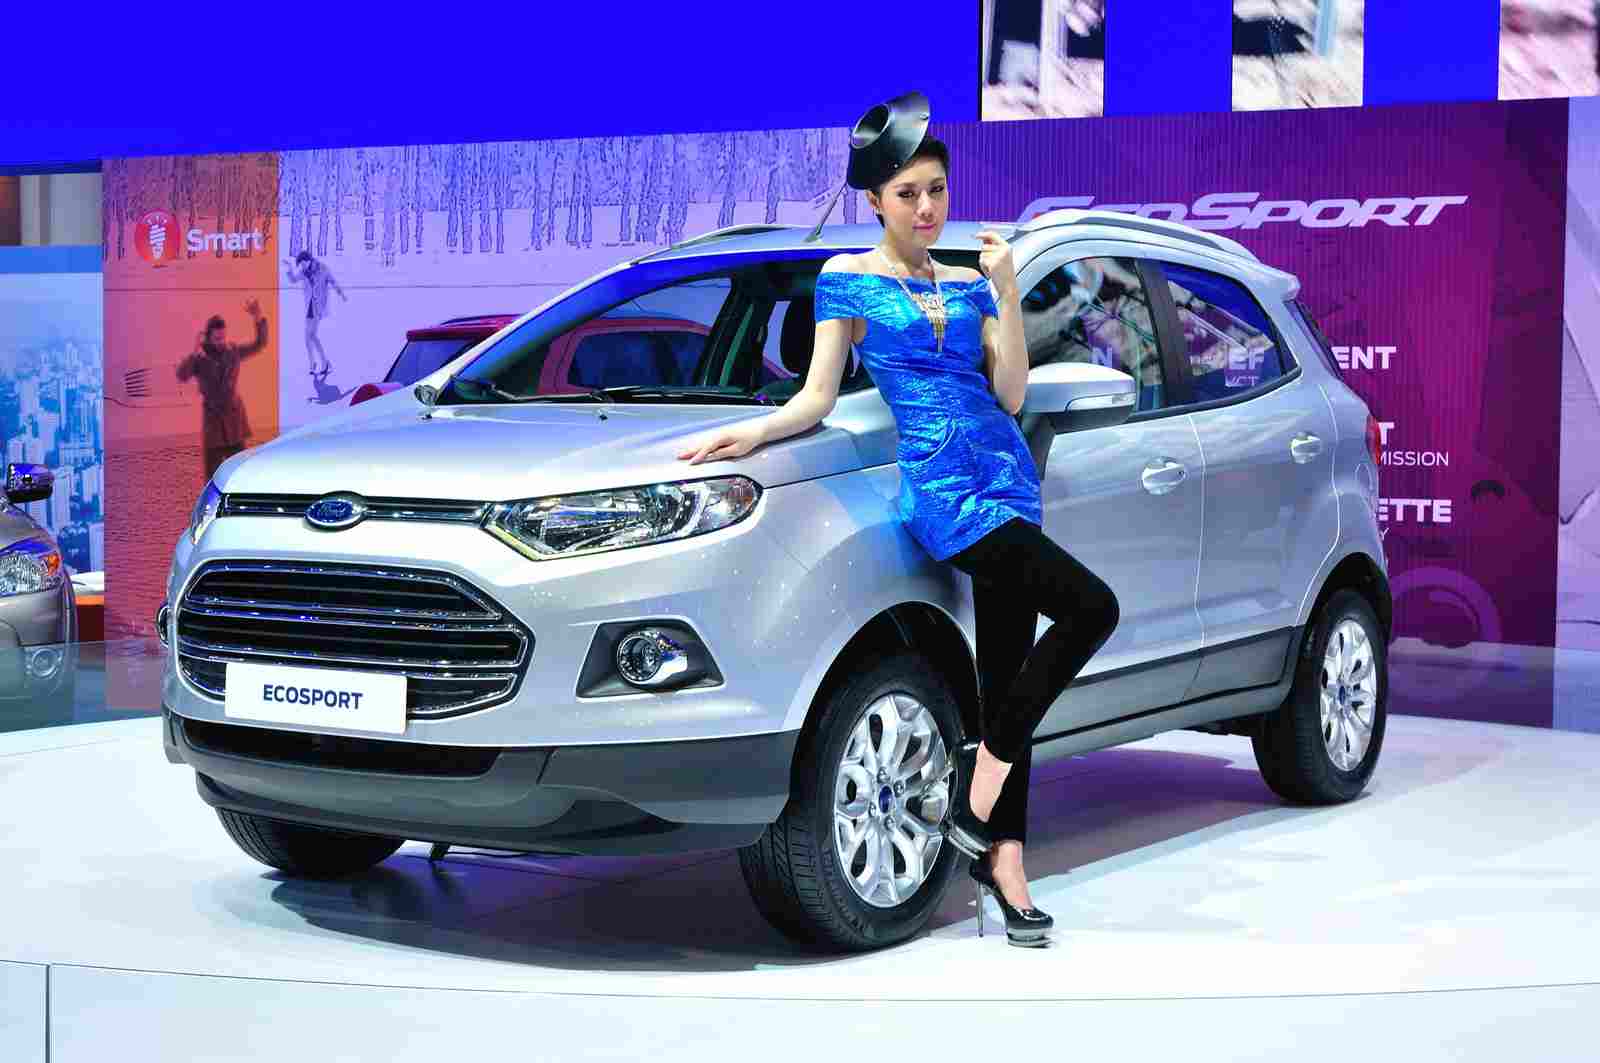 The EcoSport from Ford